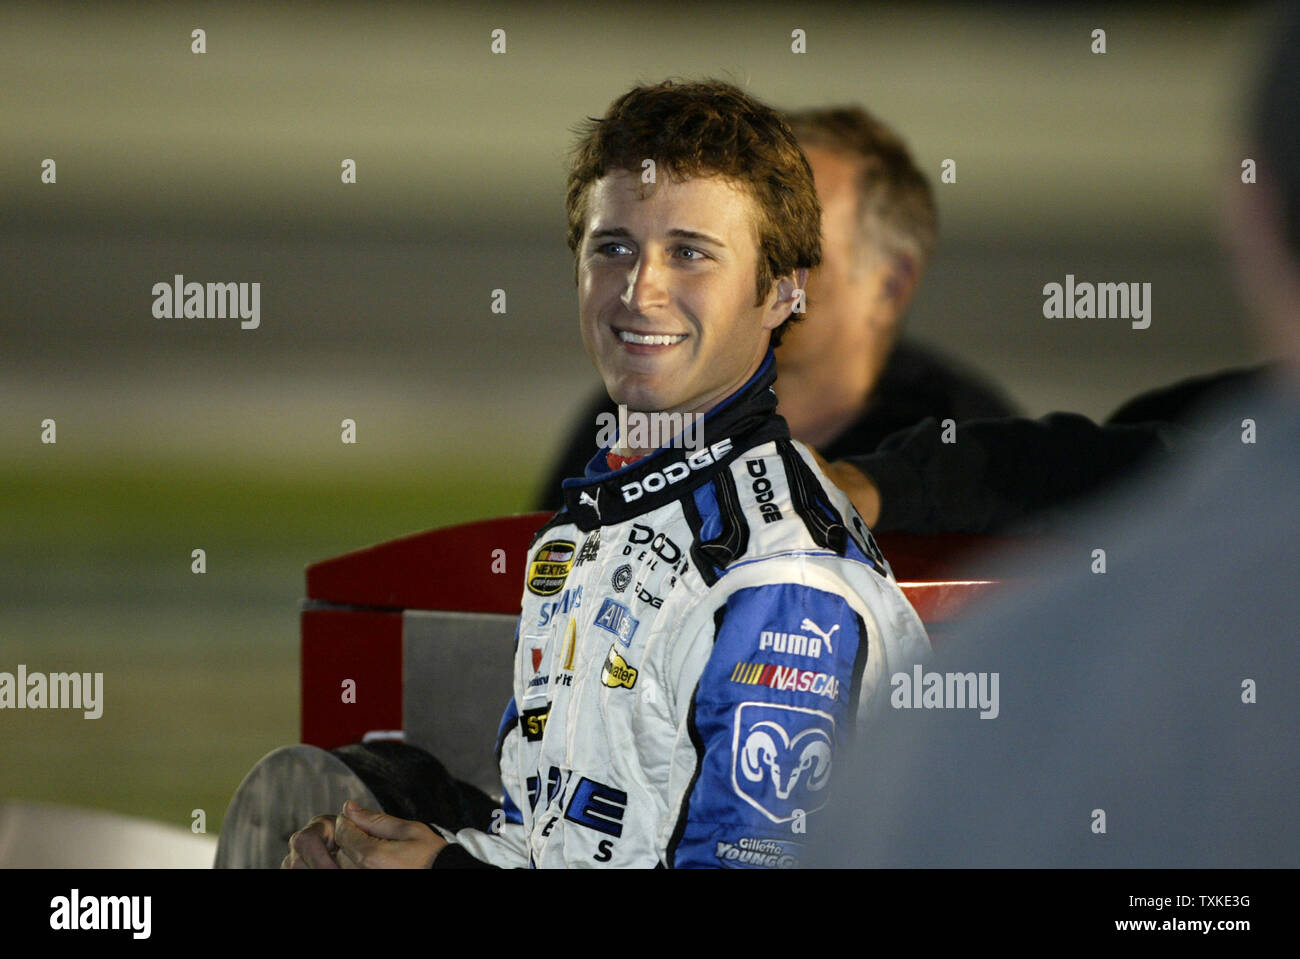 NASCAR Nextel Cup driver Kasey Kahne watches qualifying for the Bank of America 500 qualifying at Lowe's Motor Speedway in Charlotte, North Carolina on October 11, 2007. (UPI Photo/Nell Redmond) Stock Photo